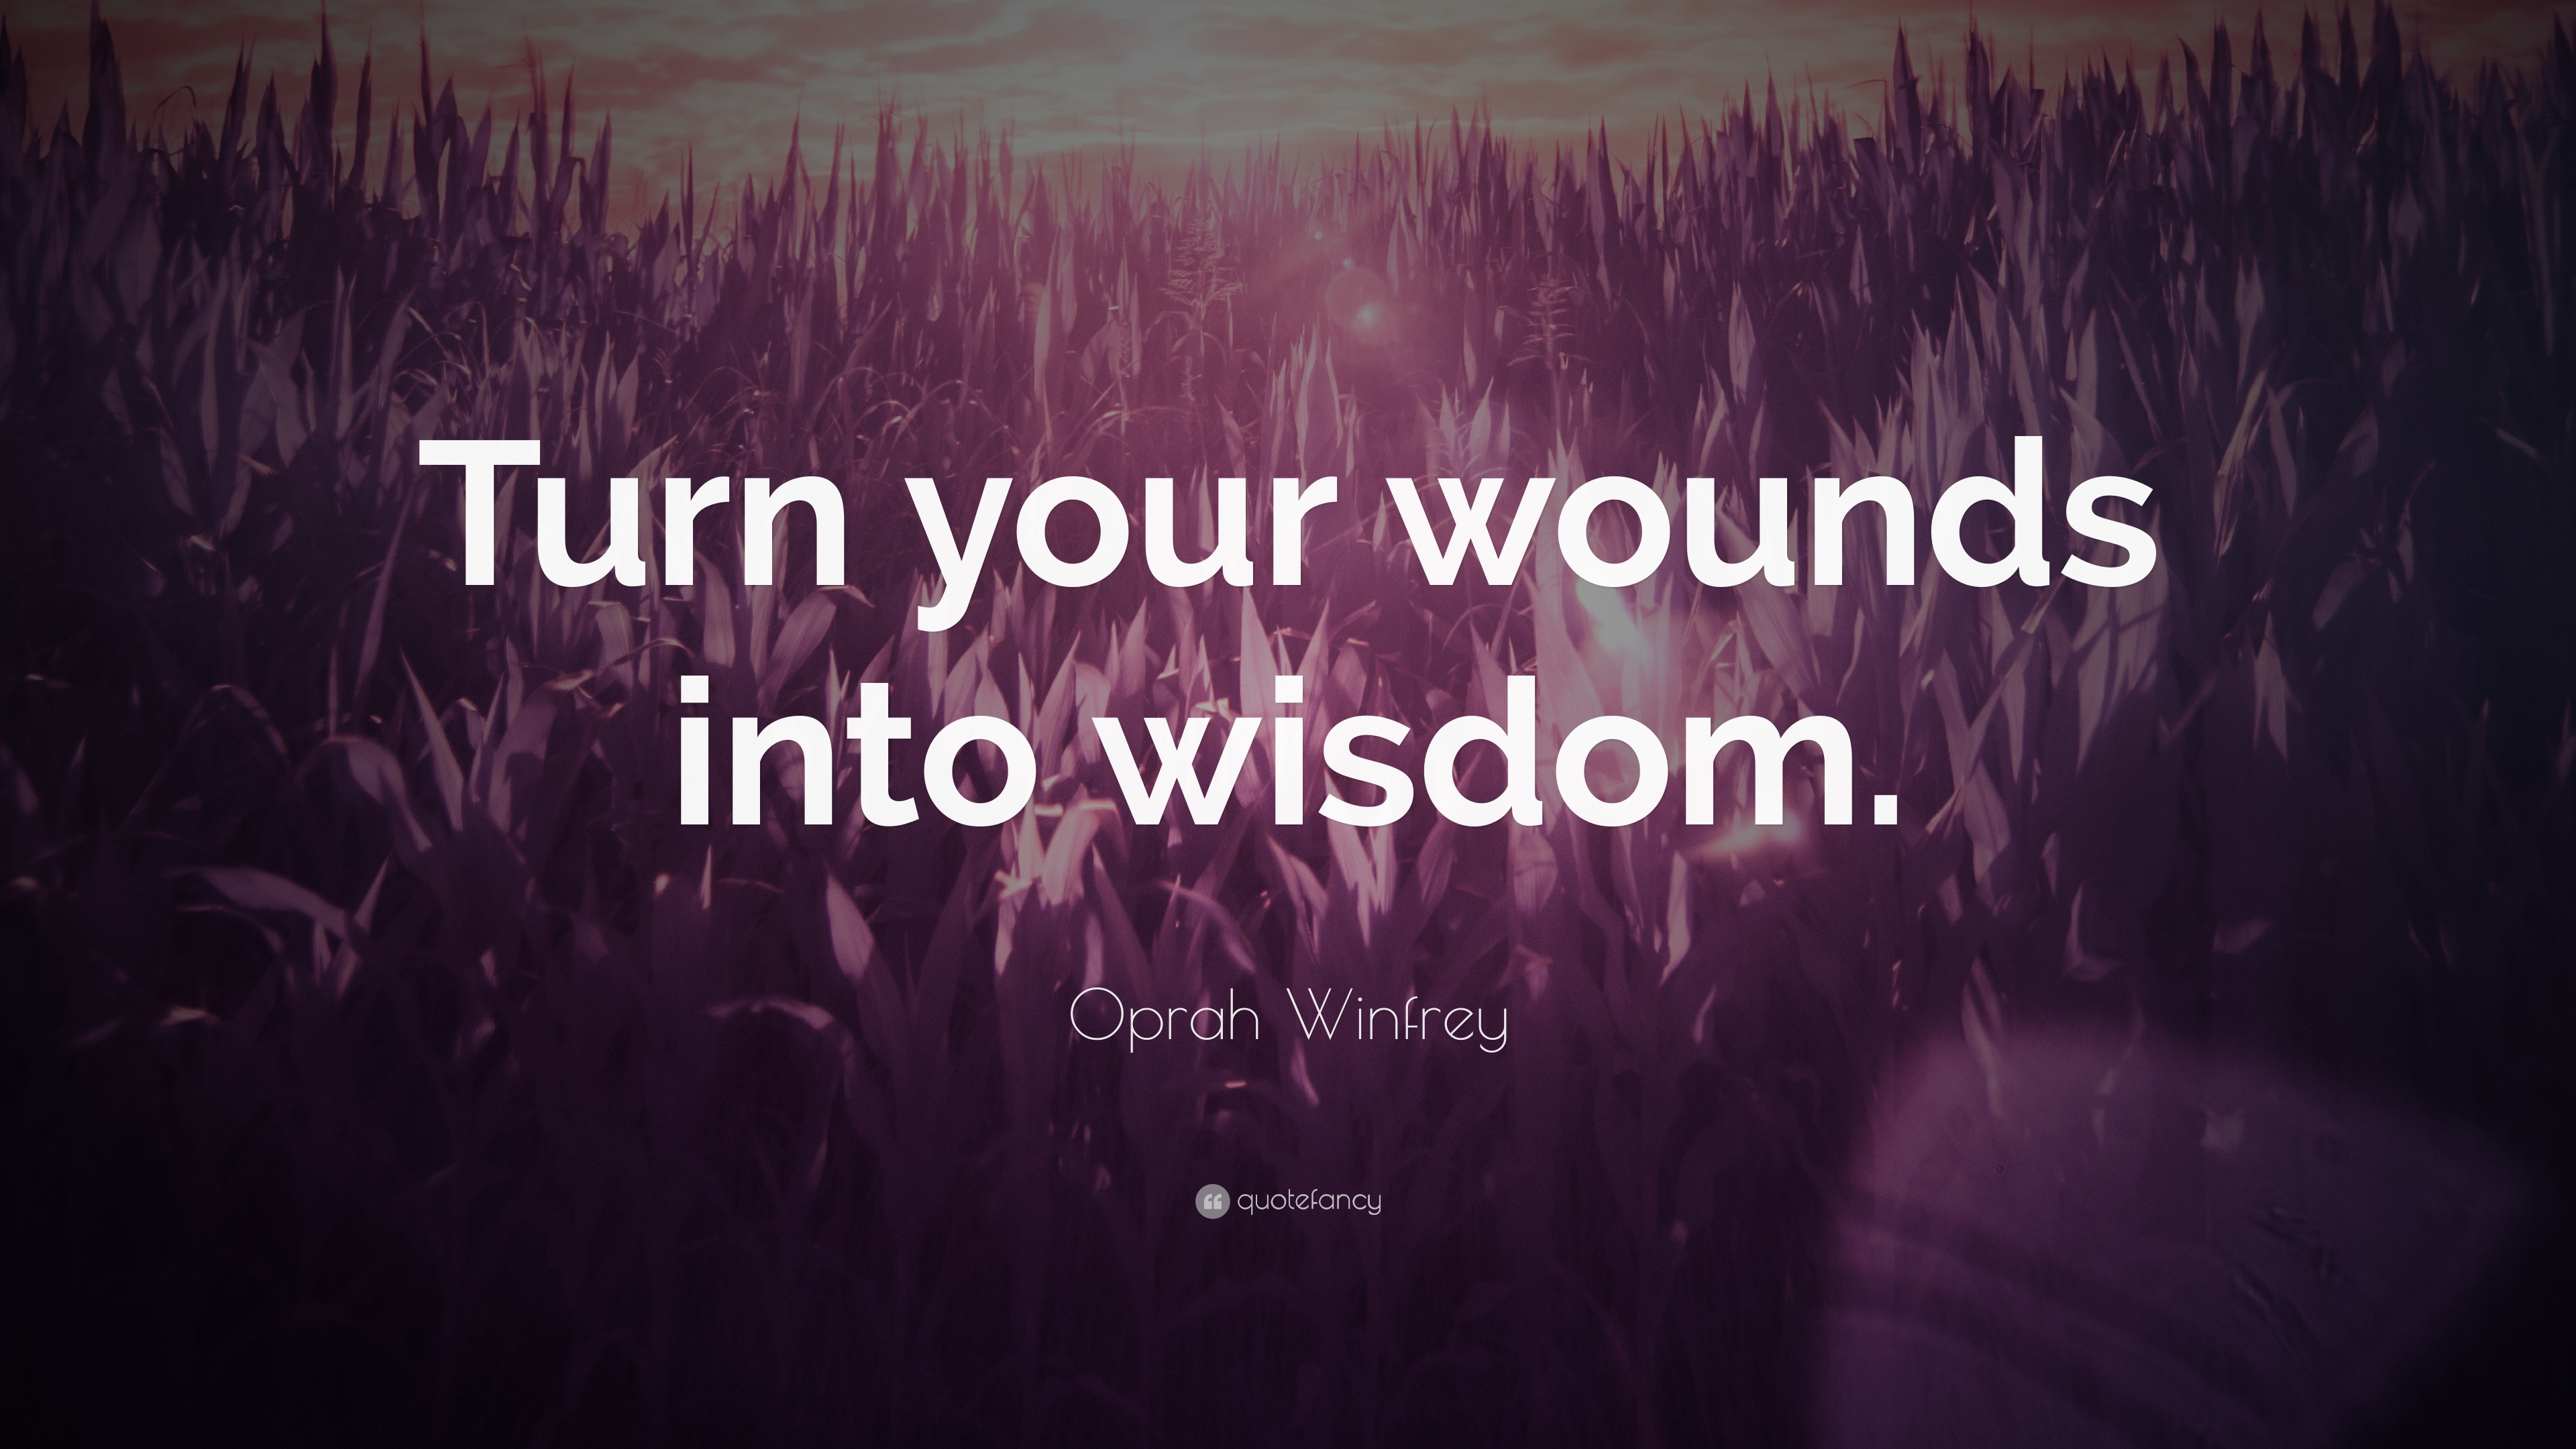 Oprah Winfrey Quote: “Turn your wounds into wisdom.” (20 wallpapers